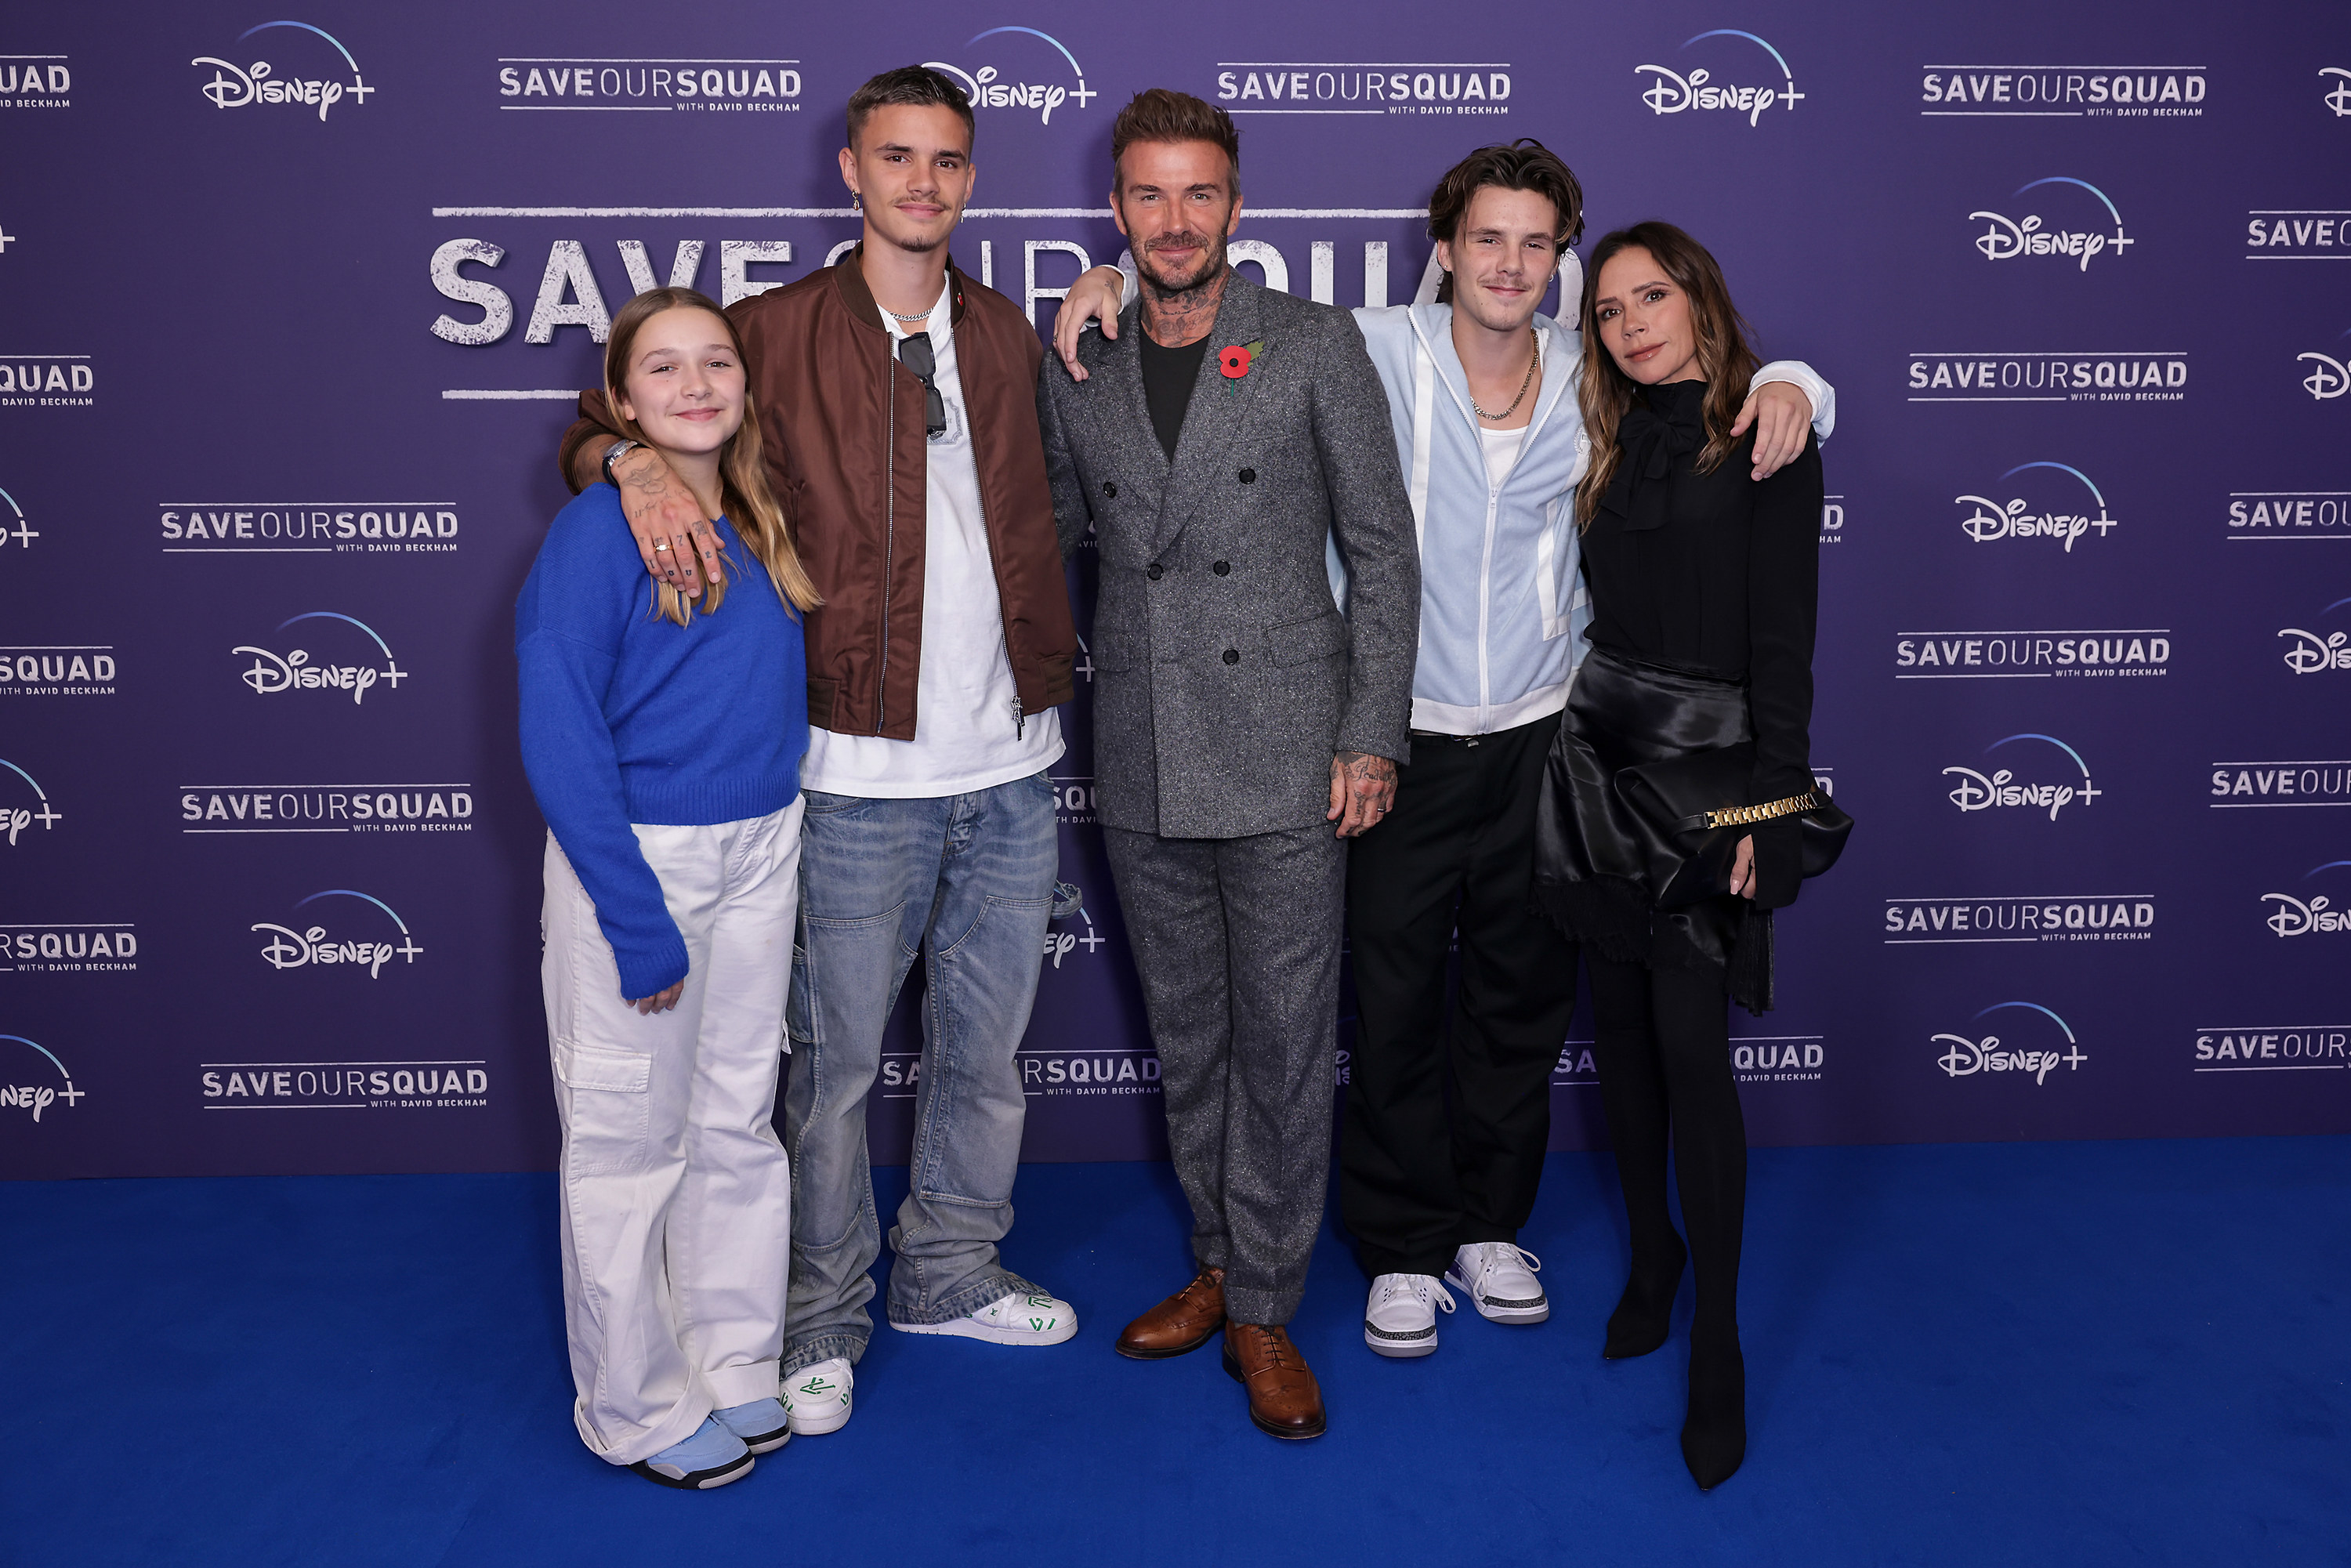 David and Victoria with three of their kids on the red carpet